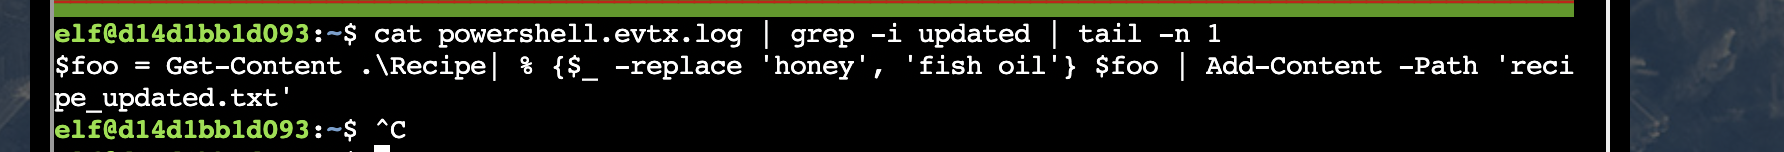 image for above command output in terminal